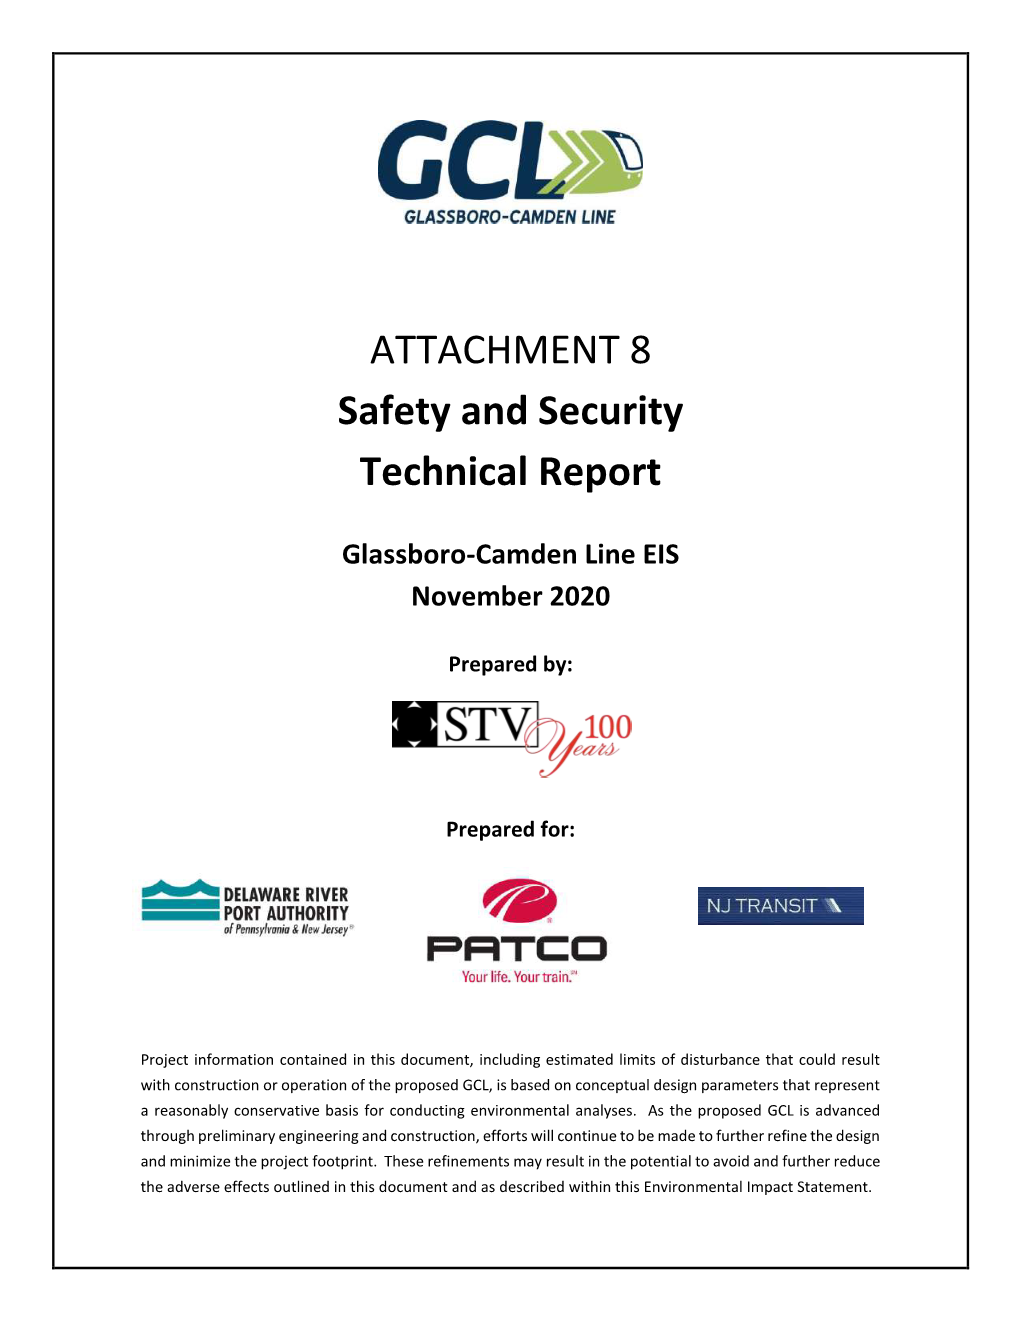 Safety and Security Technical Report